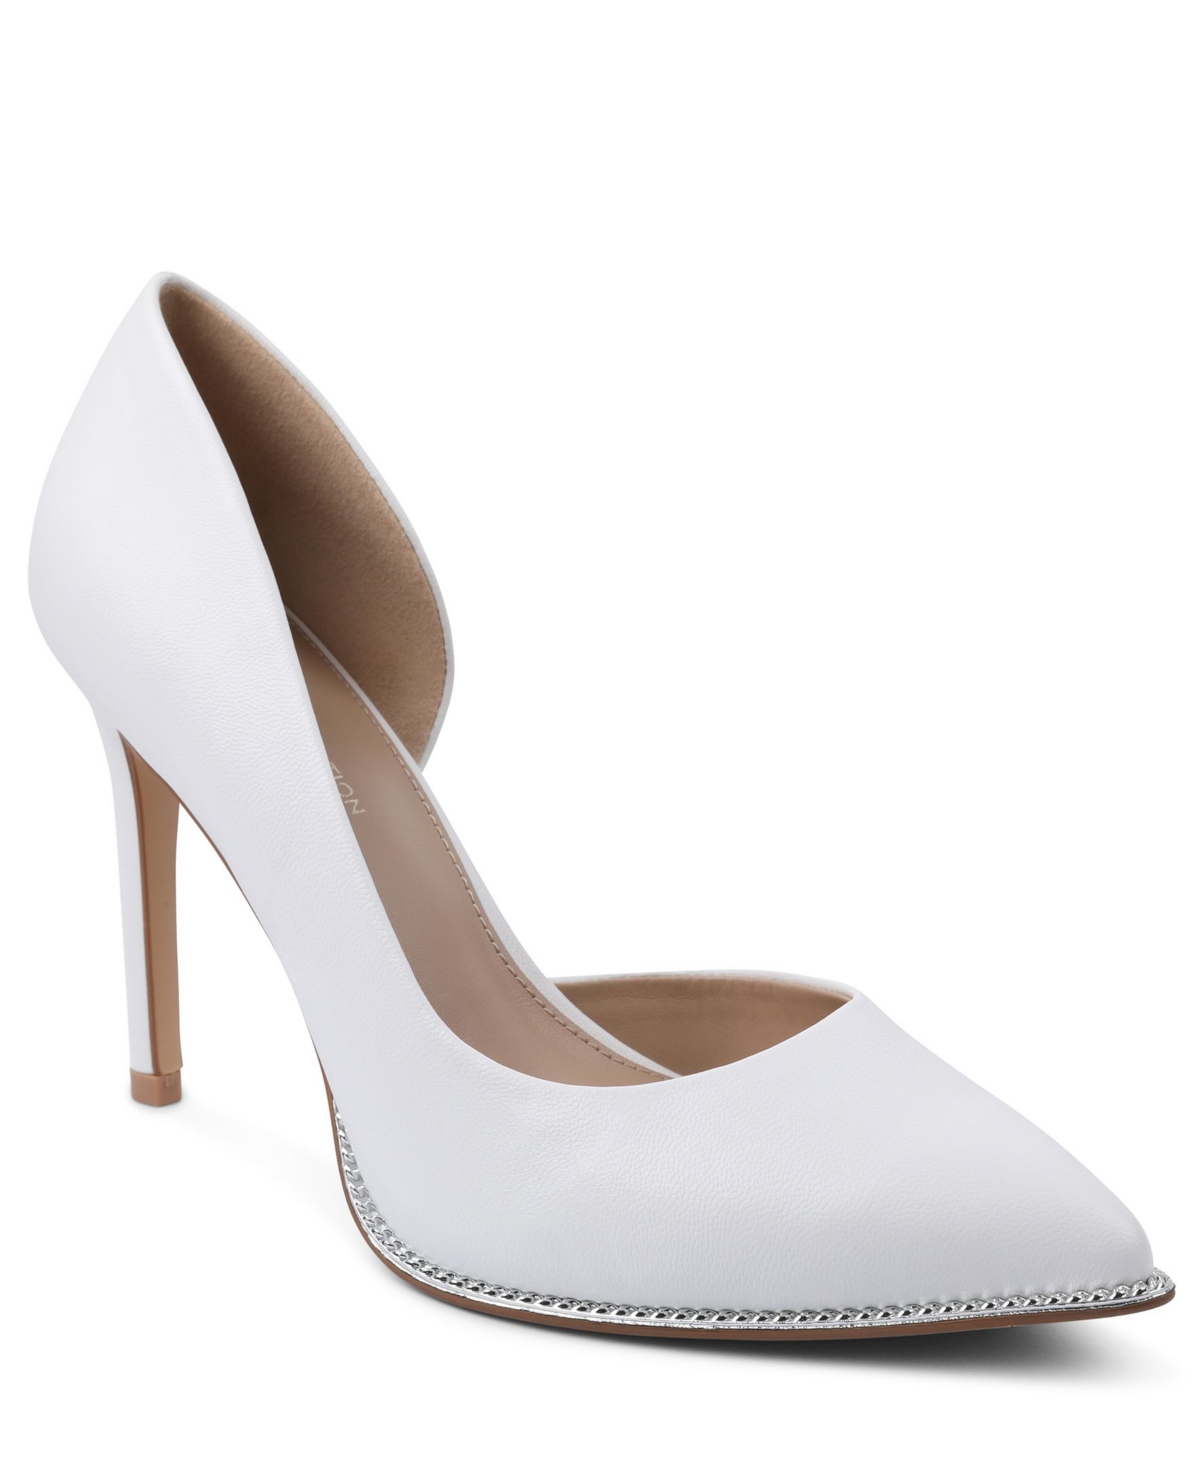 Women's Harnoy Pointed-Toe D'Orsay Pumps - Bright White